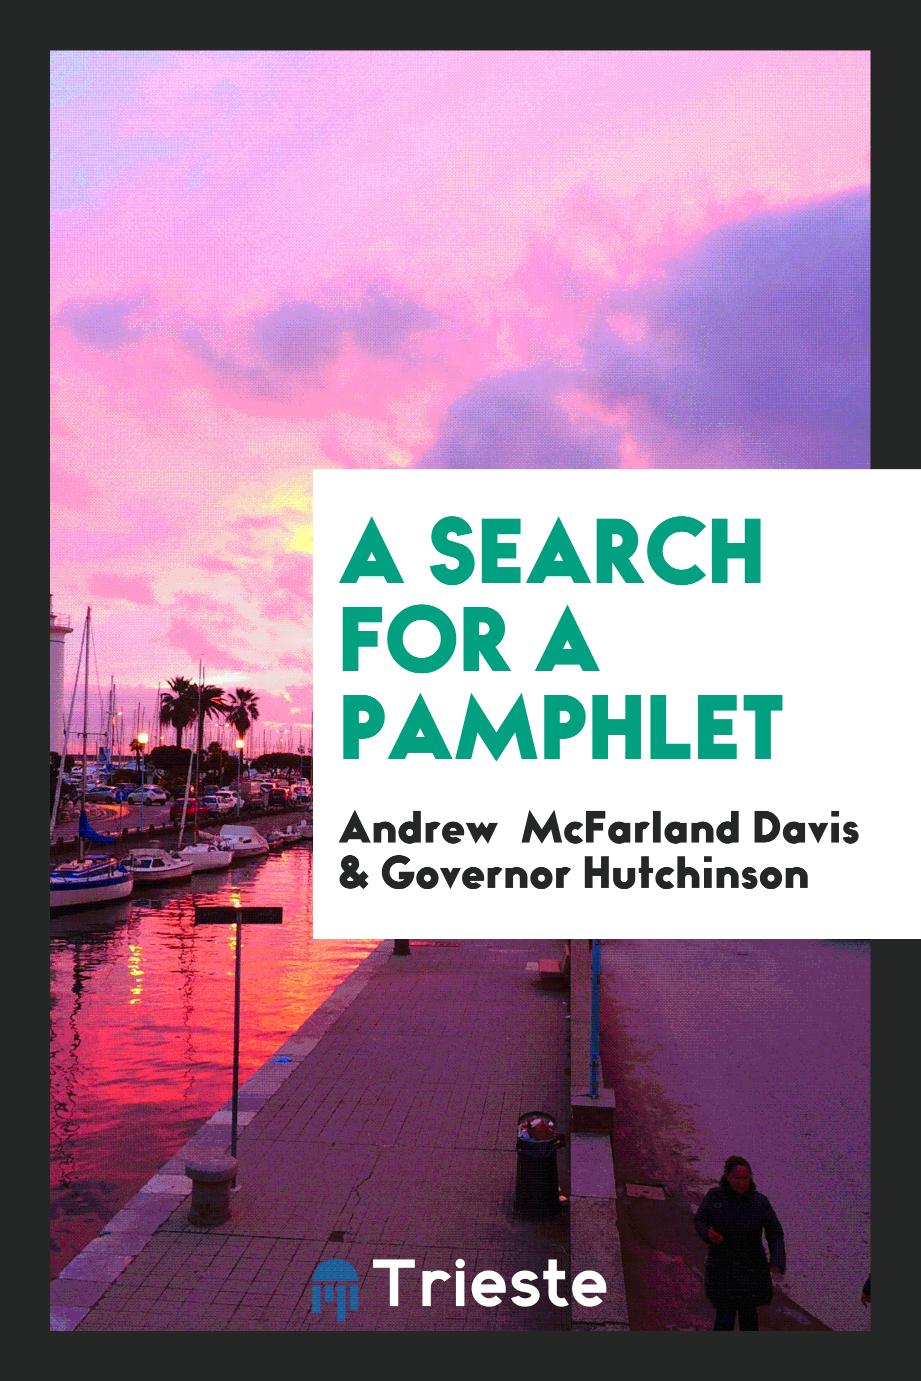 A Search for a Pamphlet